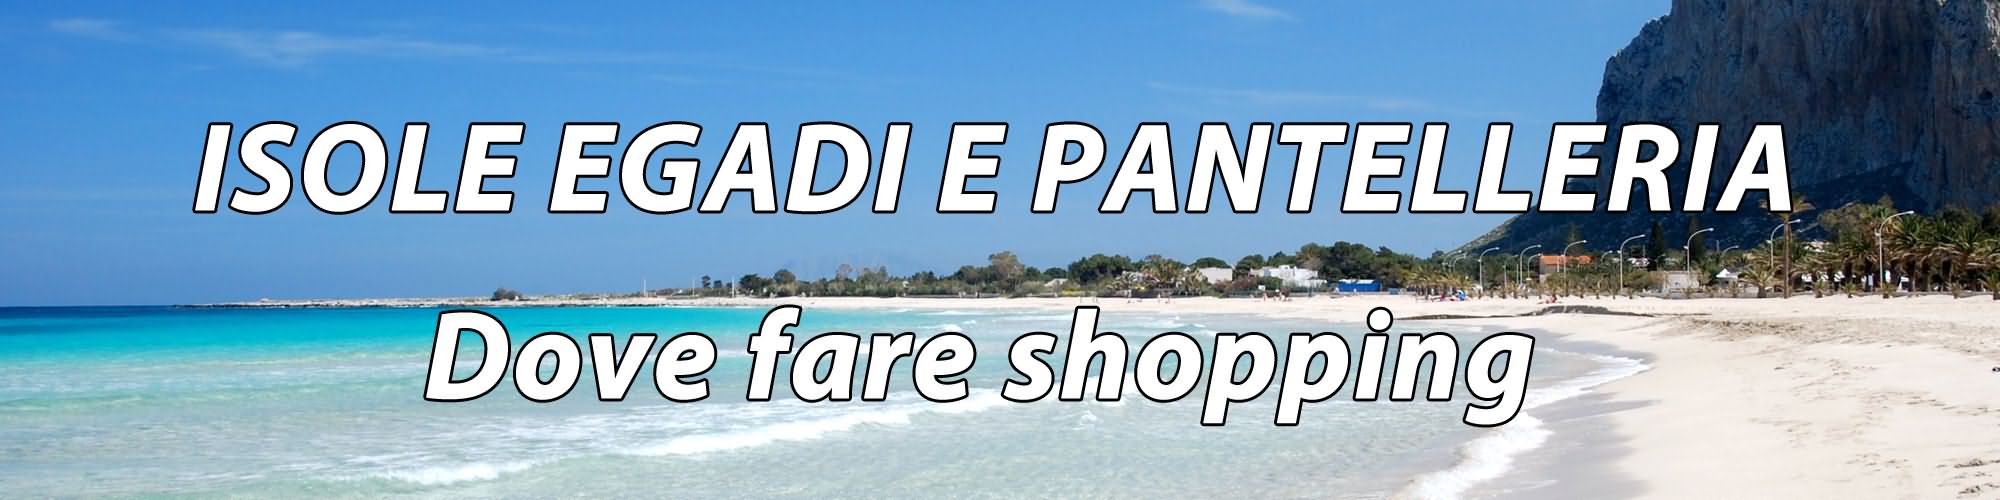 isole_shop